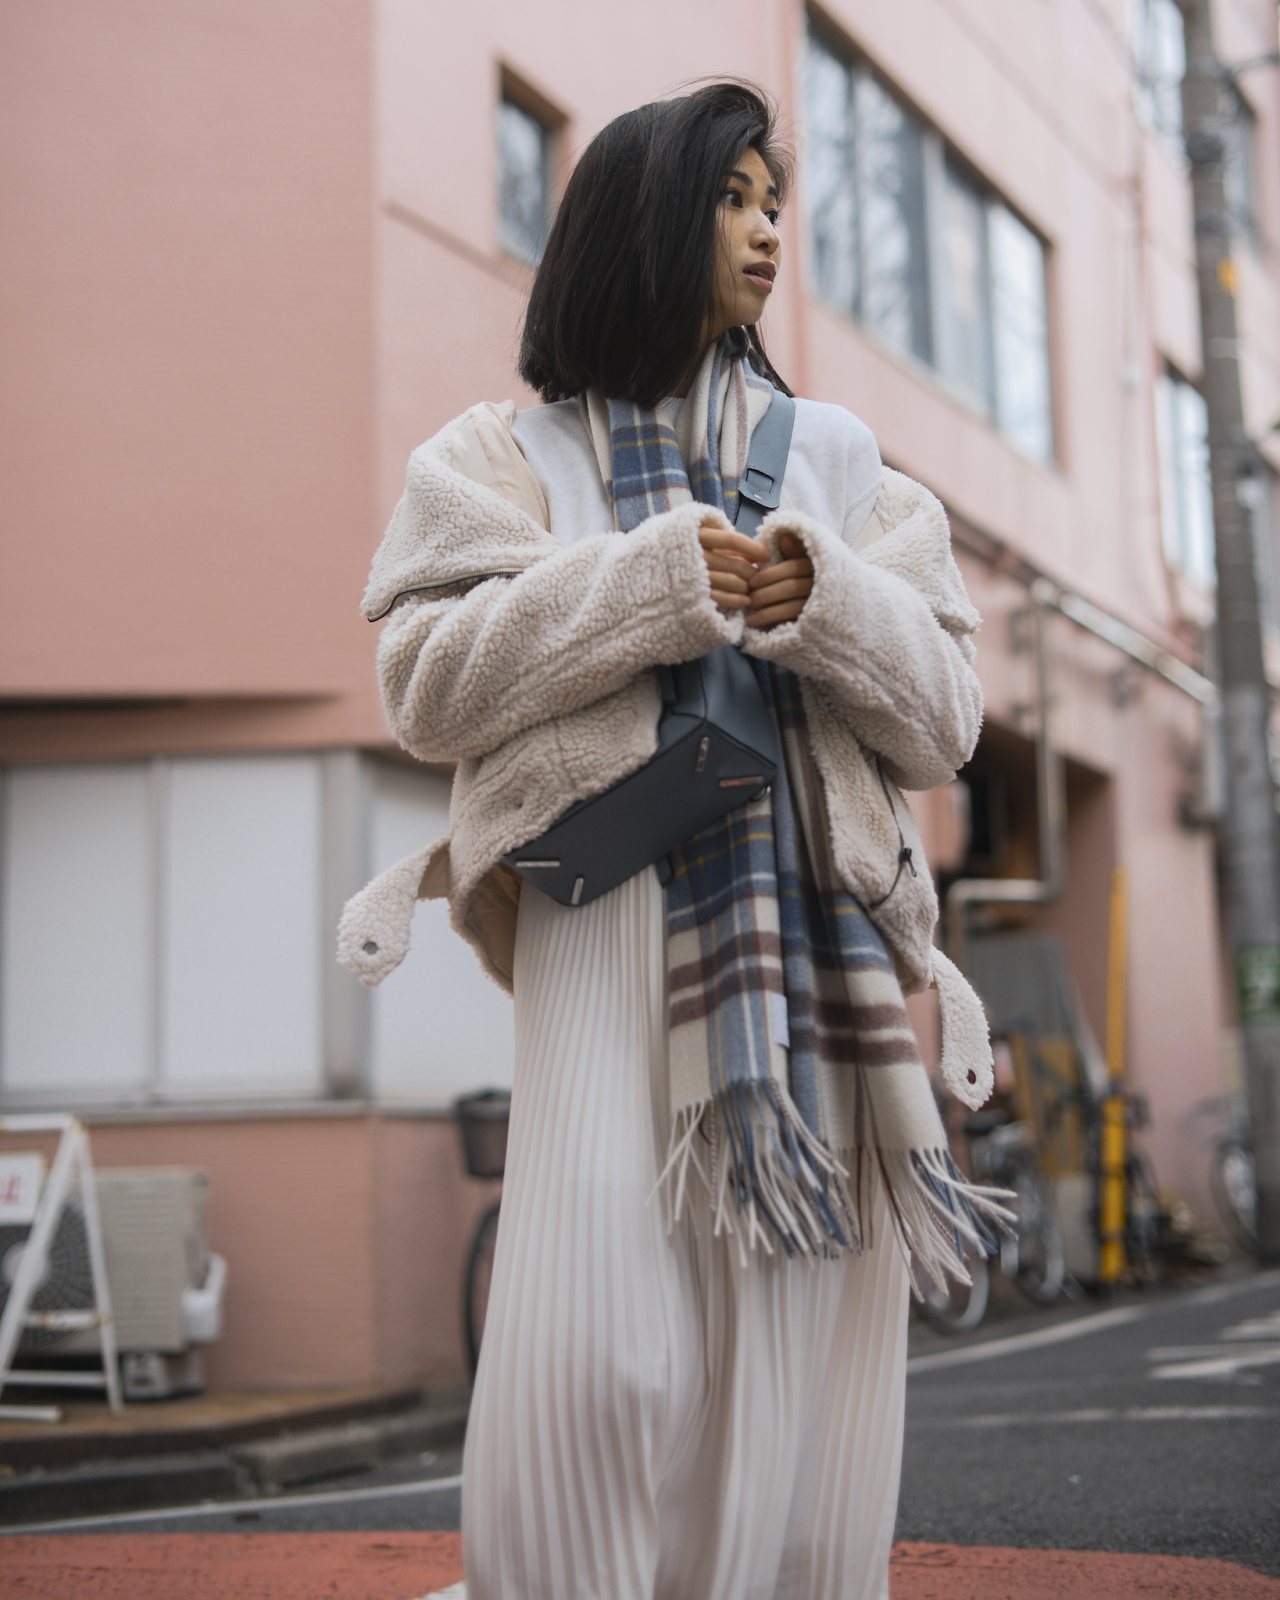 Pleated skirt outfit ideas, Spring outfits, Shopbop fleece jacket, Spring event style, Tokyo street style, monochromatic style, ways to wear a scarf, casual scarf outfits, pleated skirt and fleece jacket / Personal Style Blog FOREVERVANNY by Van Le